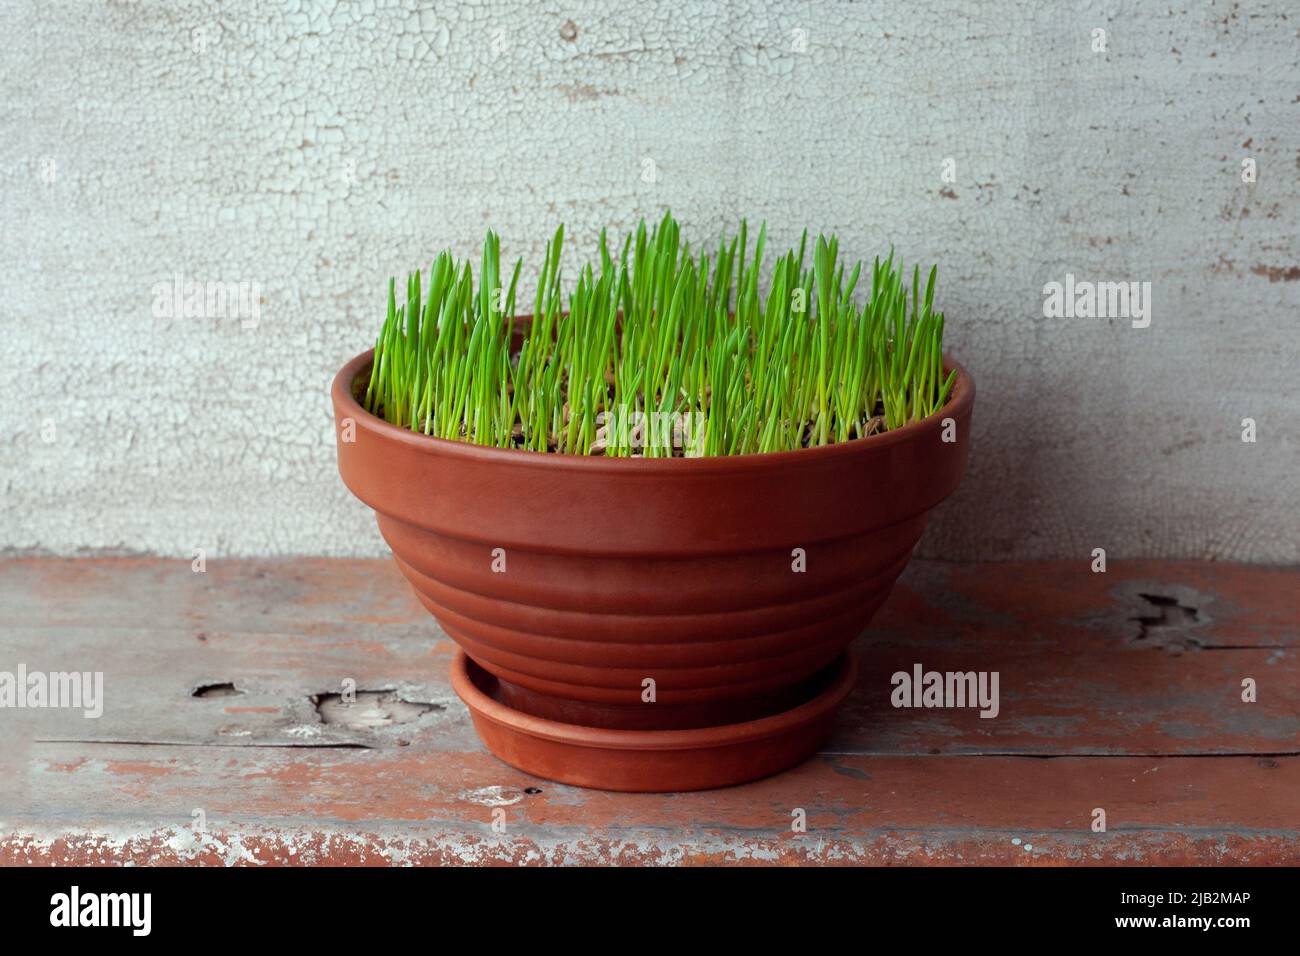 Green grass grows in a ceramic flower pot. Growing cat grass at home balcony. Oat grass plant in terracotta pot close up. Stock Photo